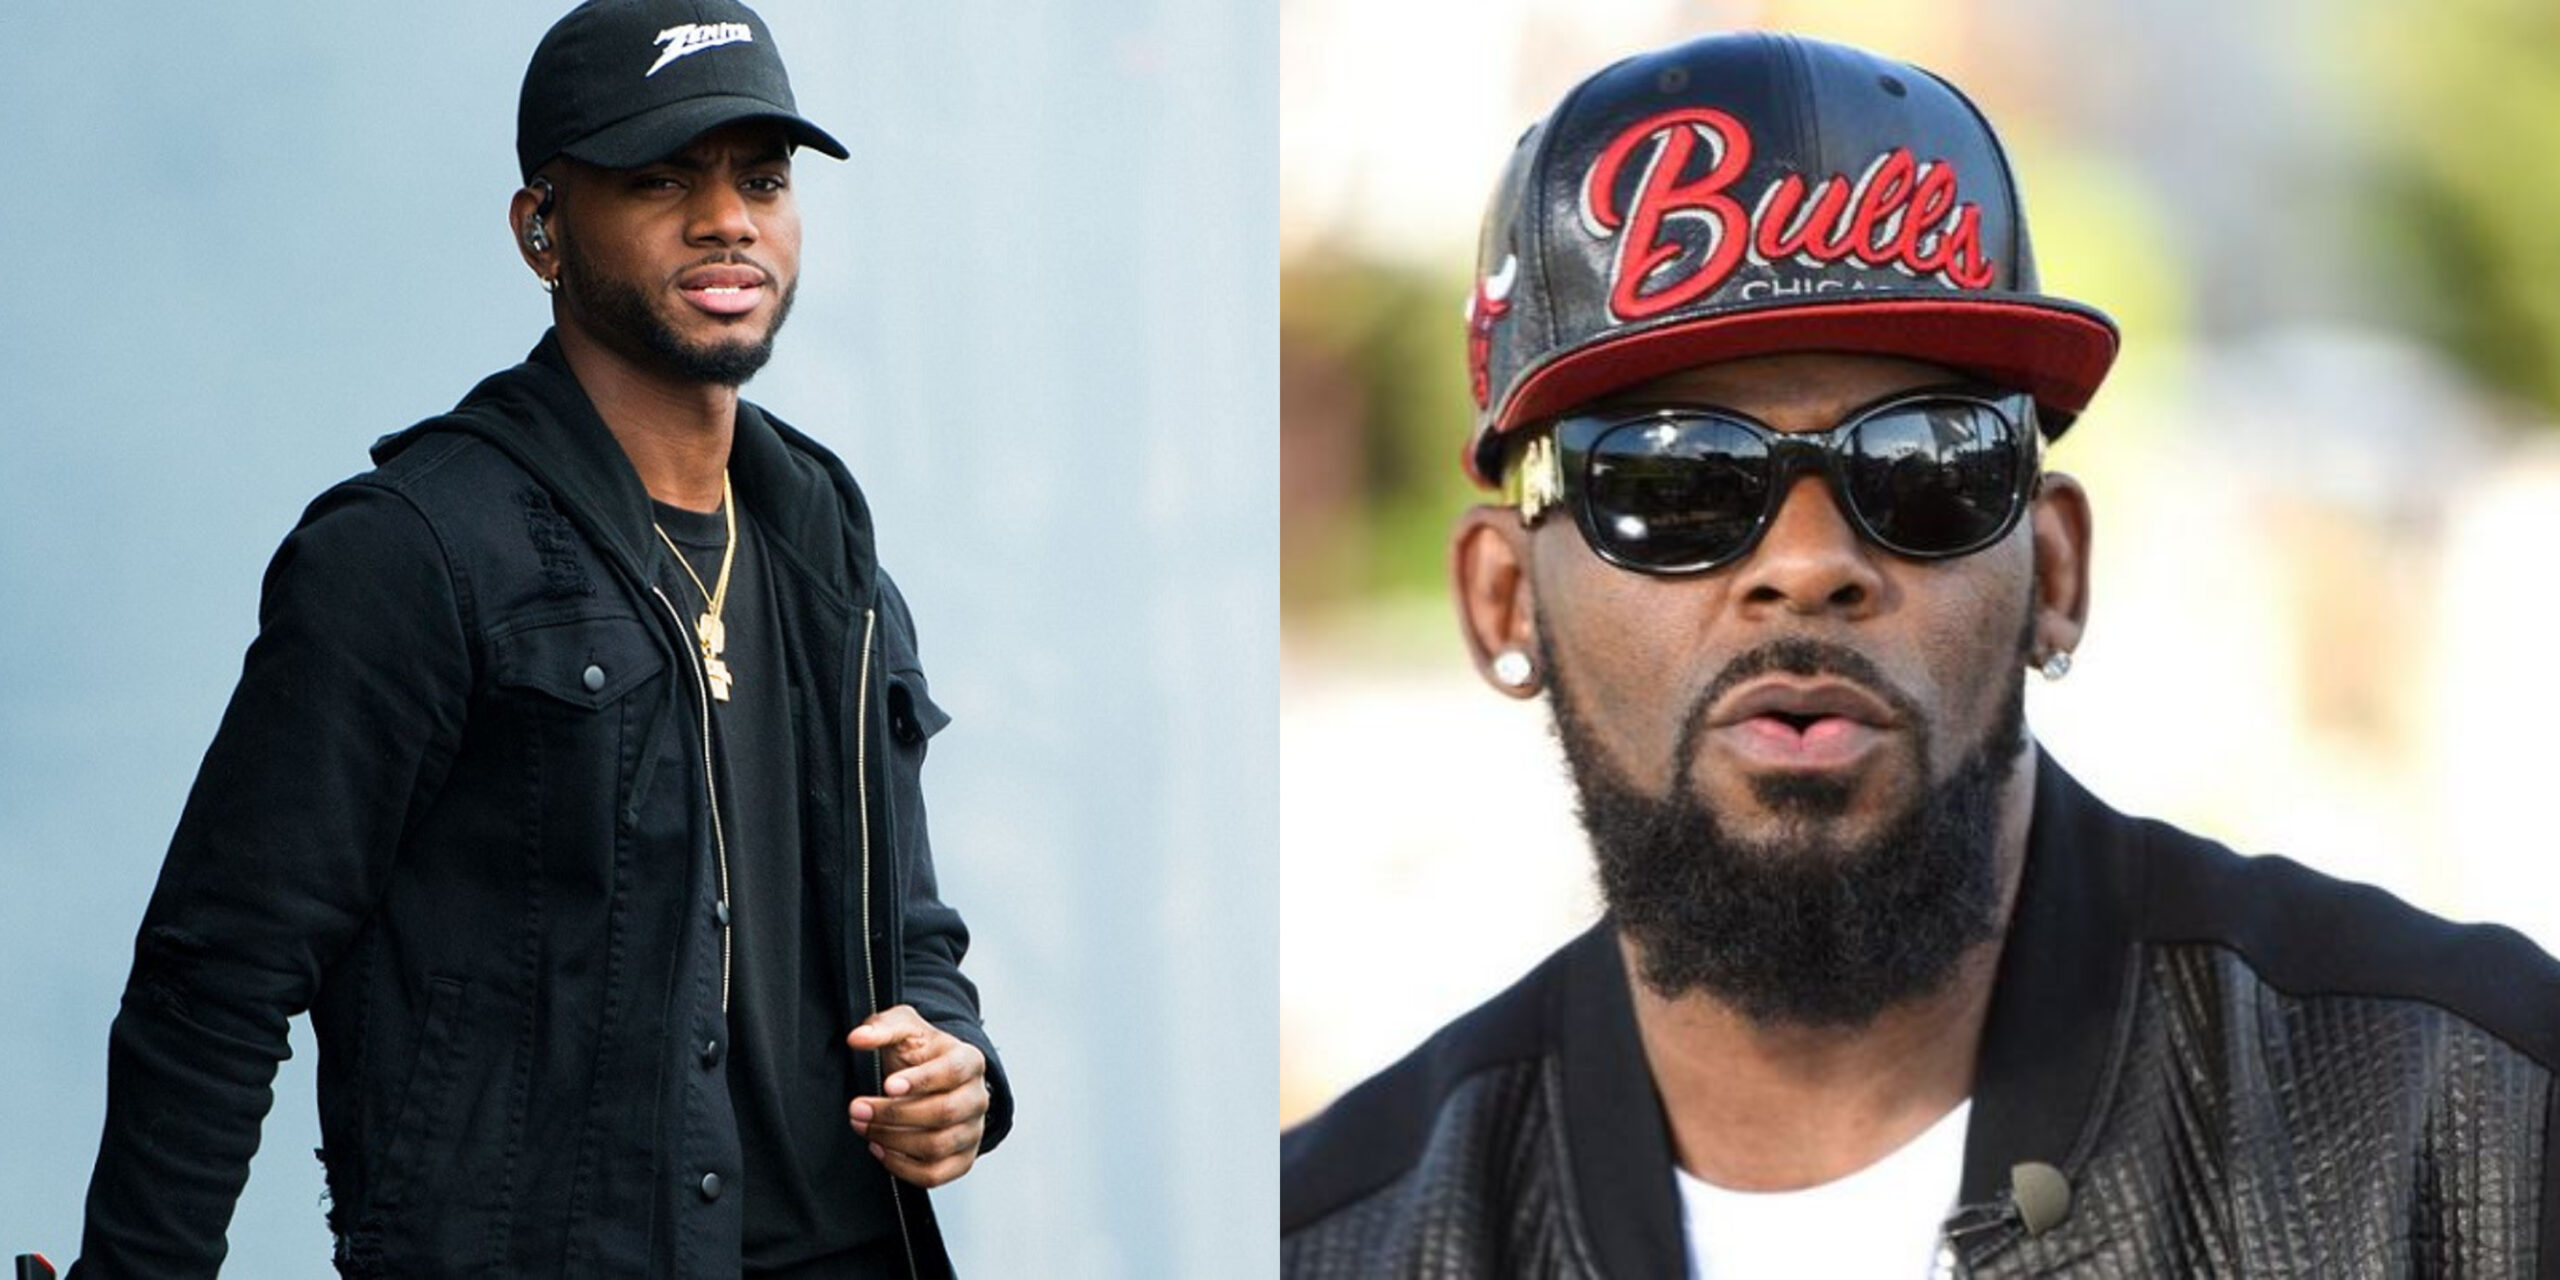 Did You Know R. Kelly Contributed to Bryson Tiller's Classic Debut Album, 'TRAPSOUL'?